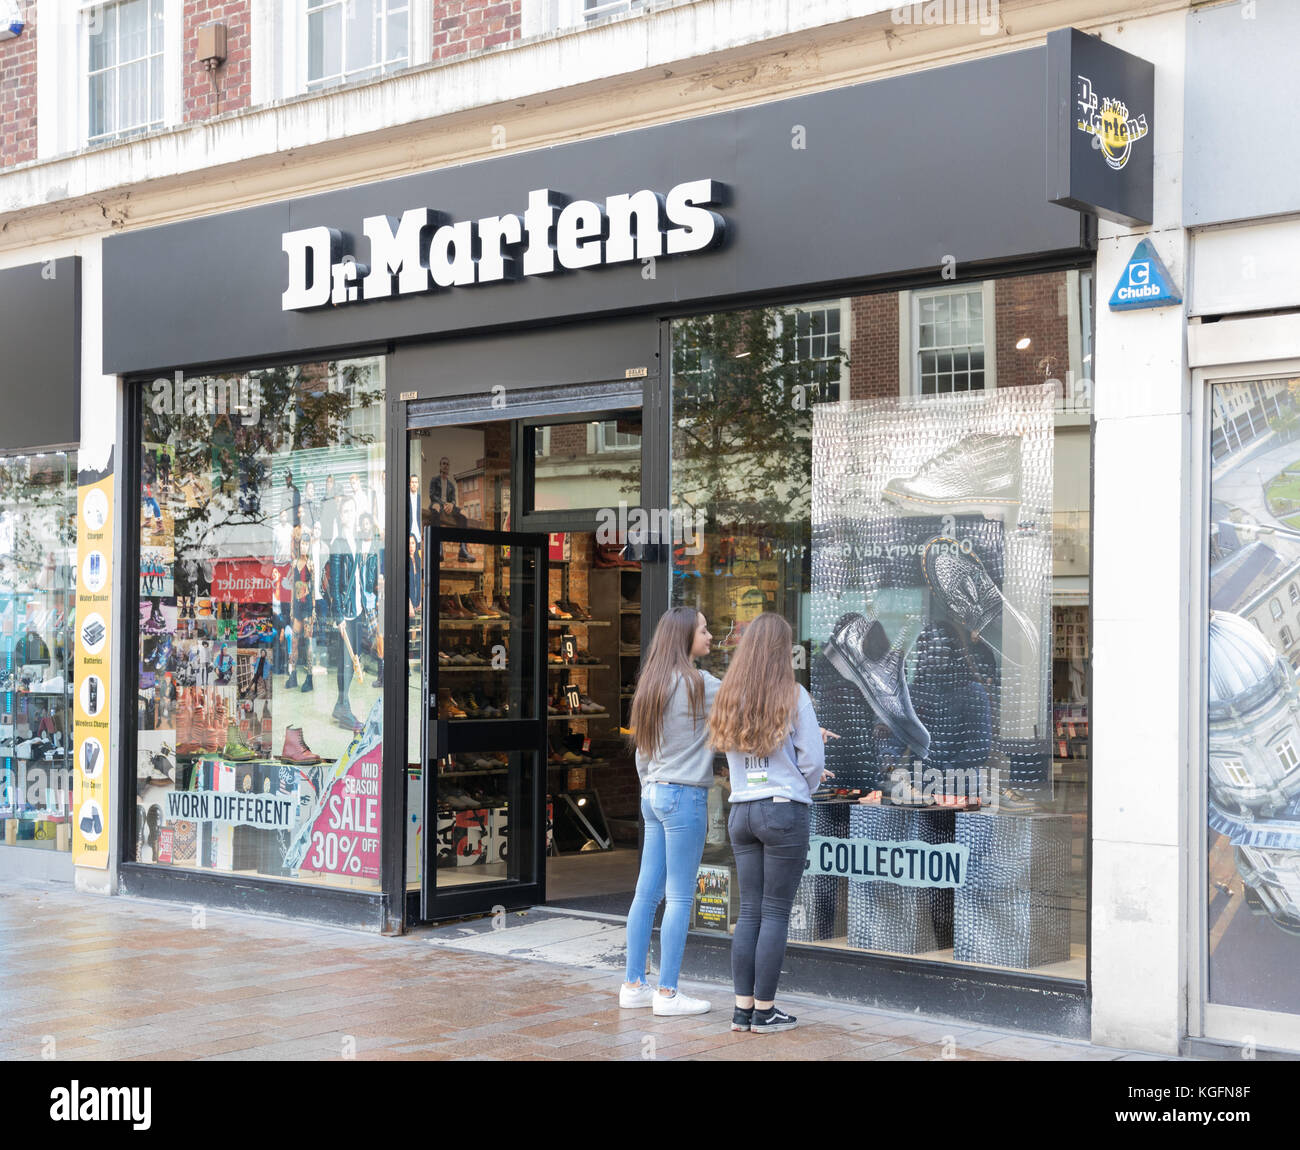 Doc Martens Shop High Resolution Stock Photography and Images - Alamy